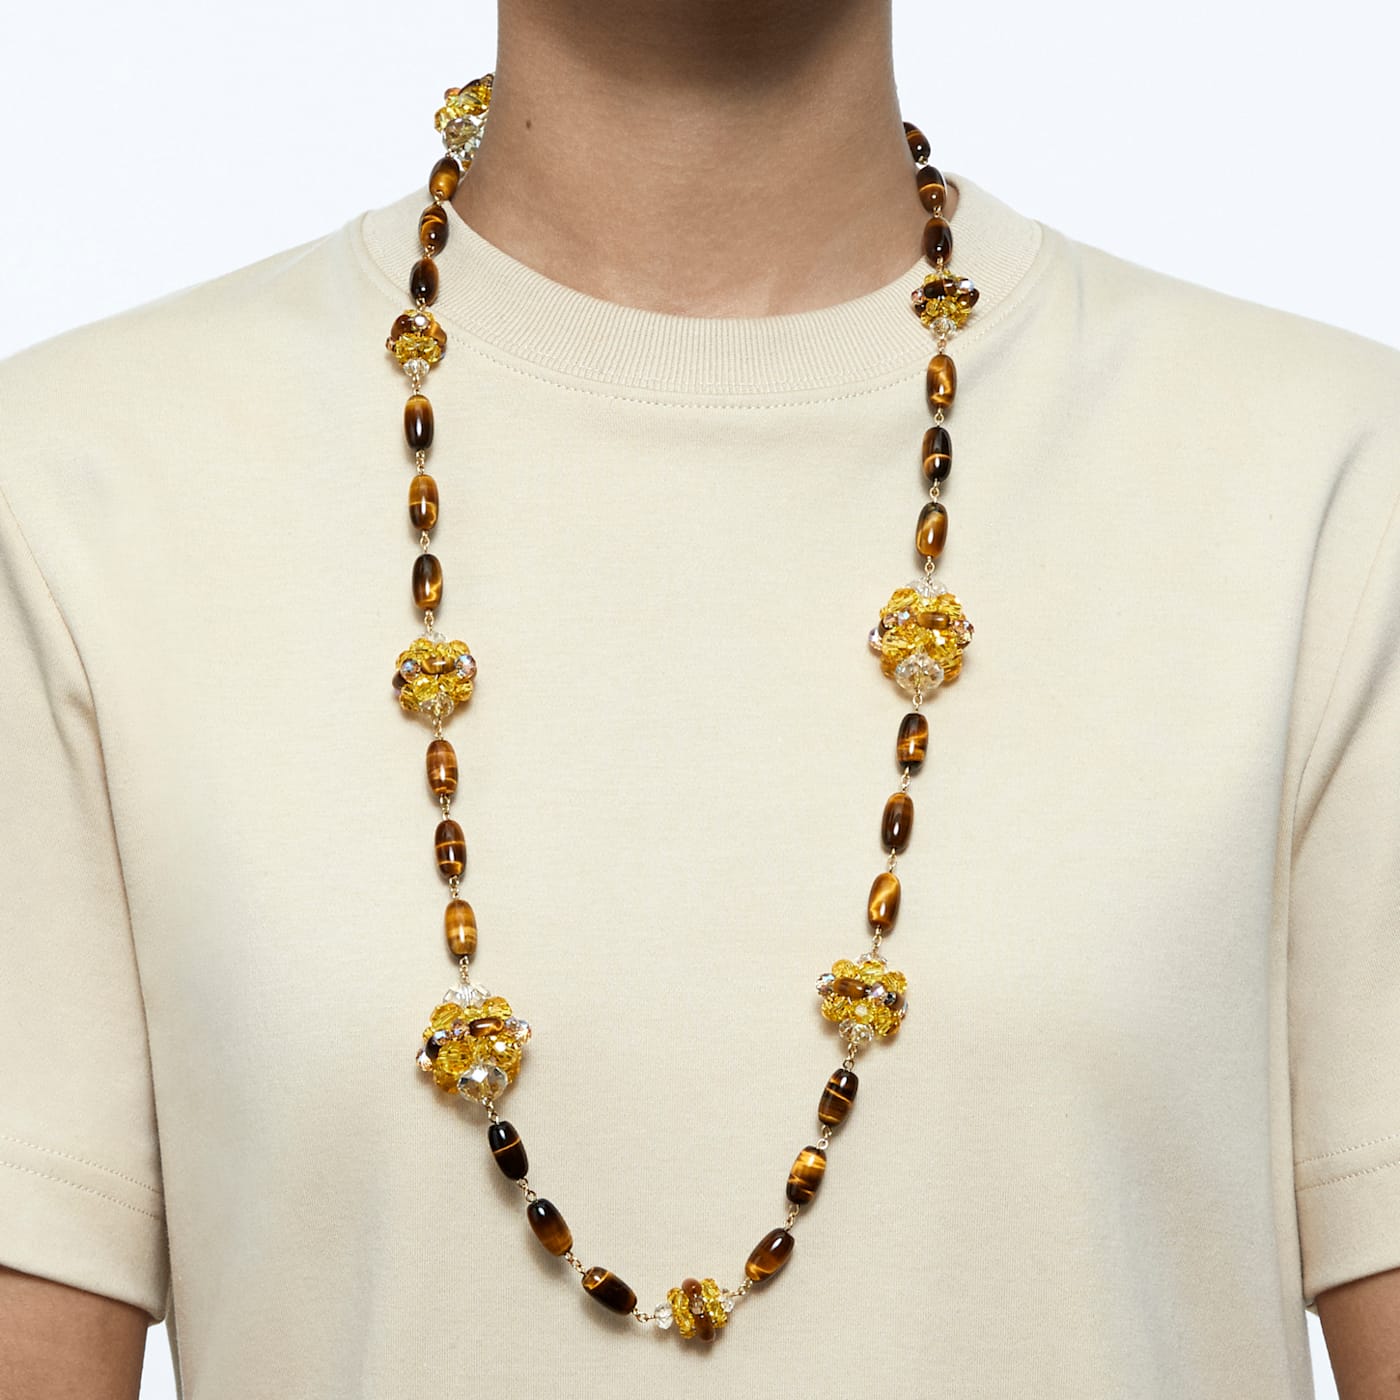 SOMNIA LONG NECKLACE, BROWN, GOLD-TONE PLATED